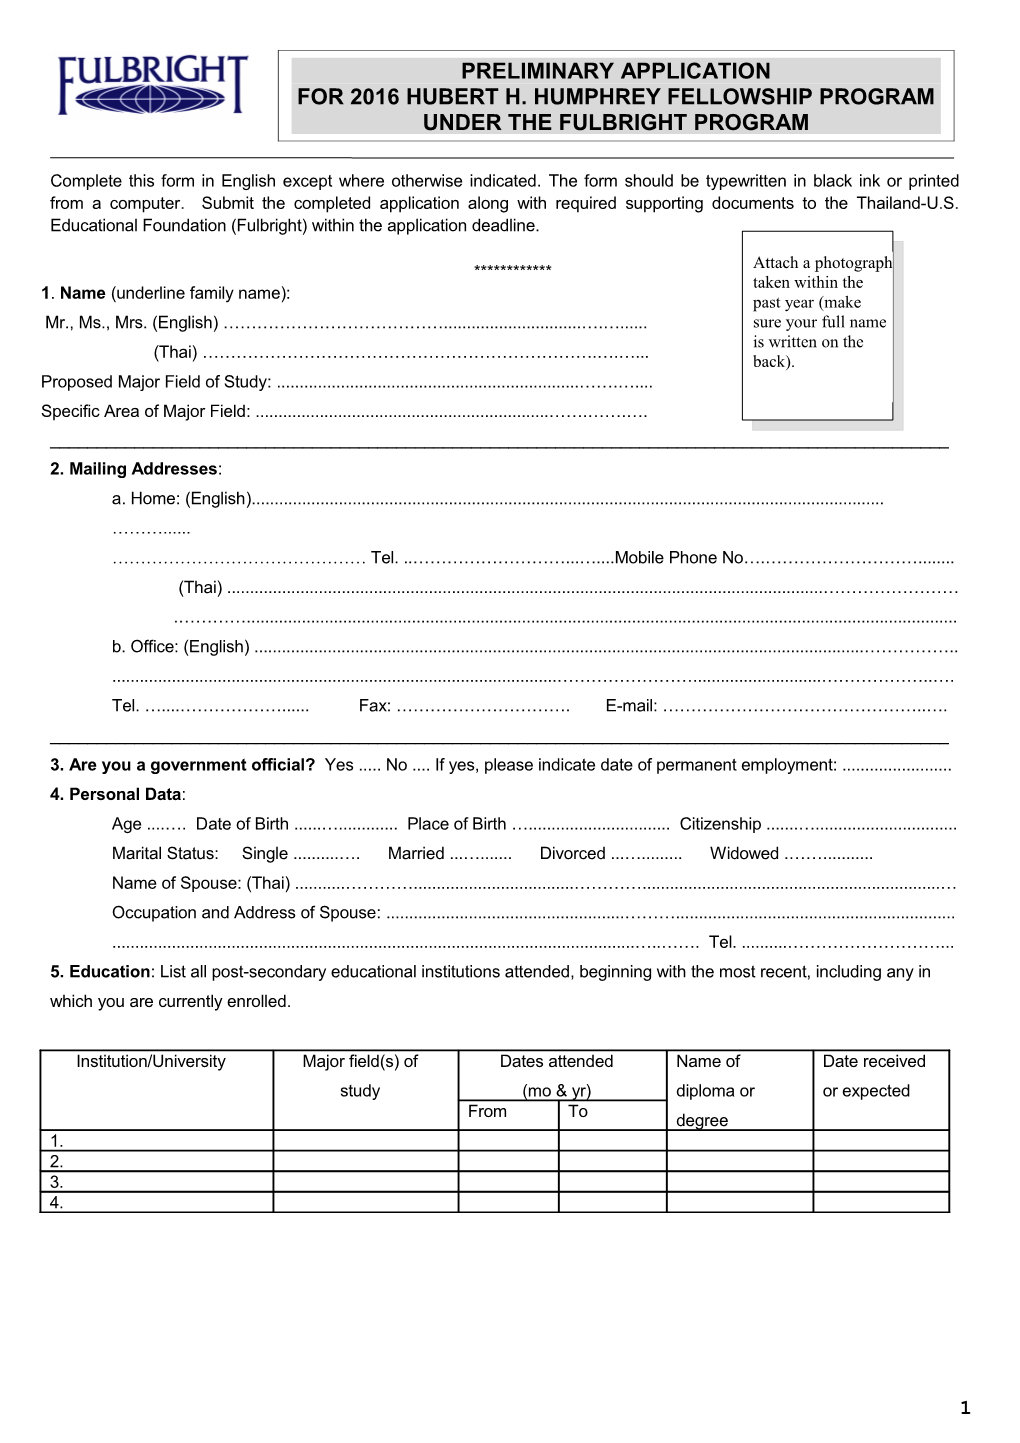 Complete This Form in English Except Where Otherwise Indicated. the Form Should Be Typewritten